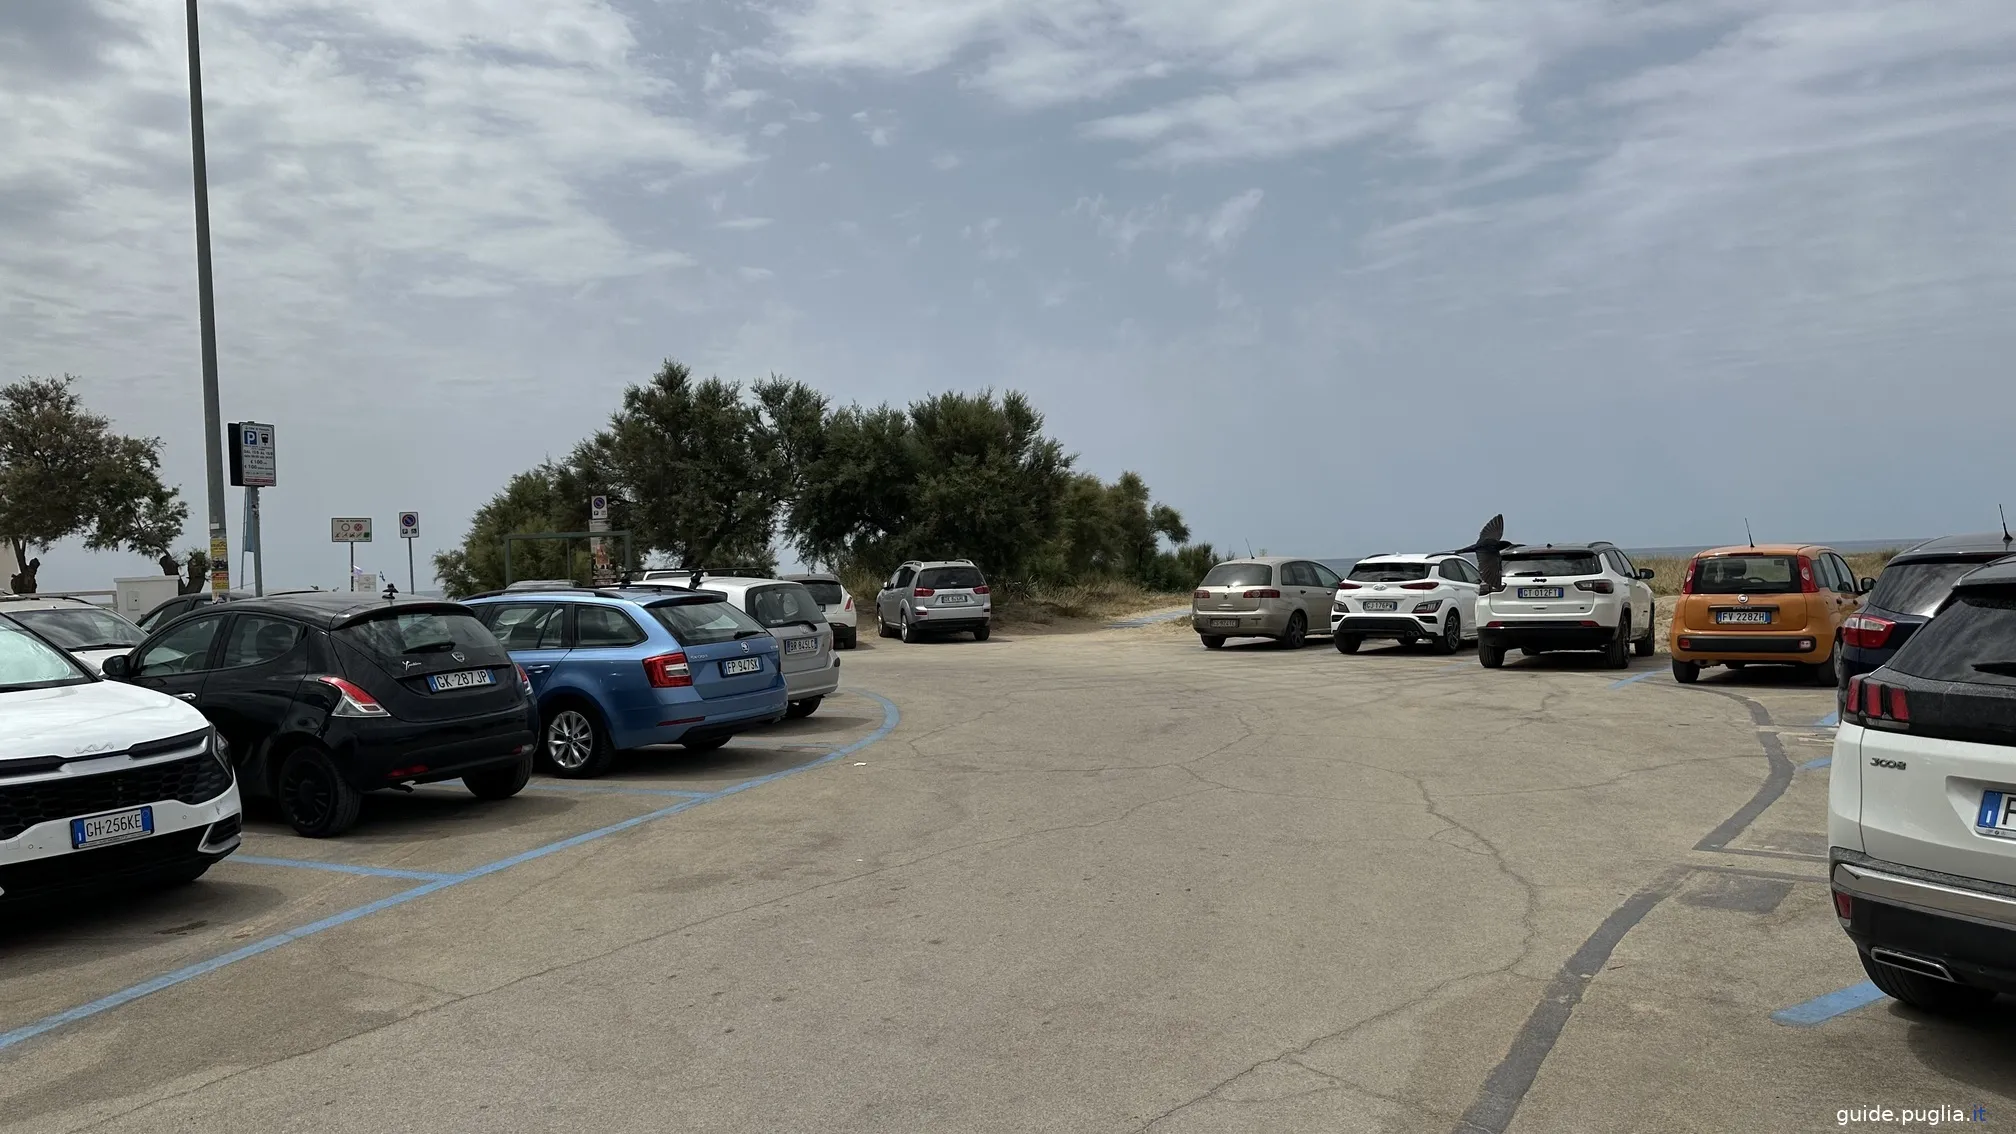 Where to park in San Pietro in Bevagna